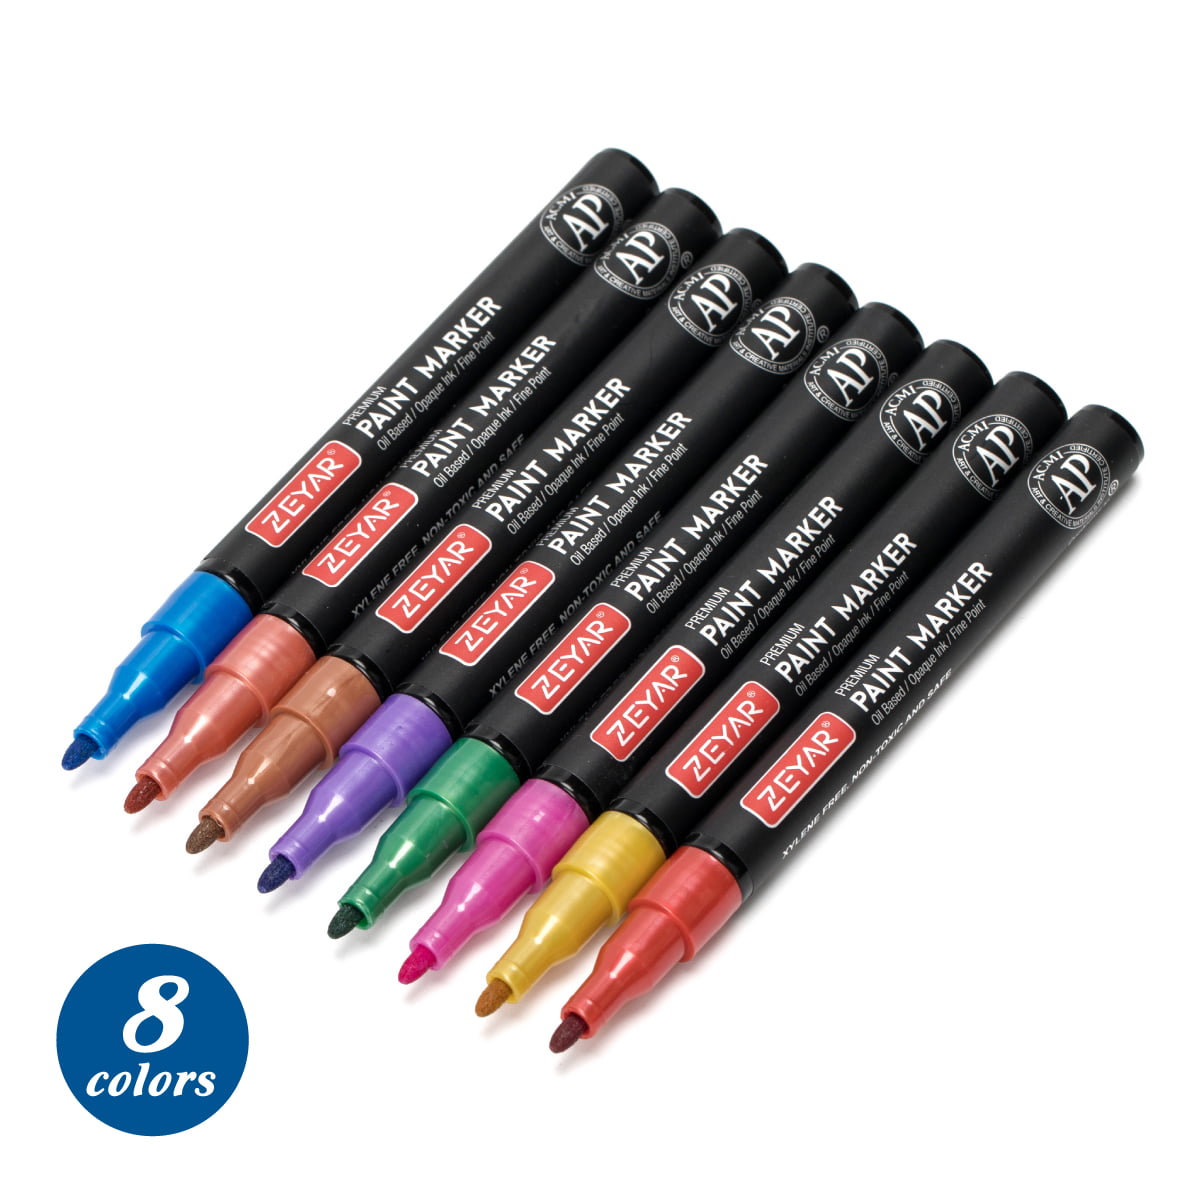 ZEYAR Permanent Marker Pens, JUMBO Size, Aluminum Barrel, Set of 2, Premium  Waterproof & Smear Proof Markers, Quick Drying, Writes on most surfaces